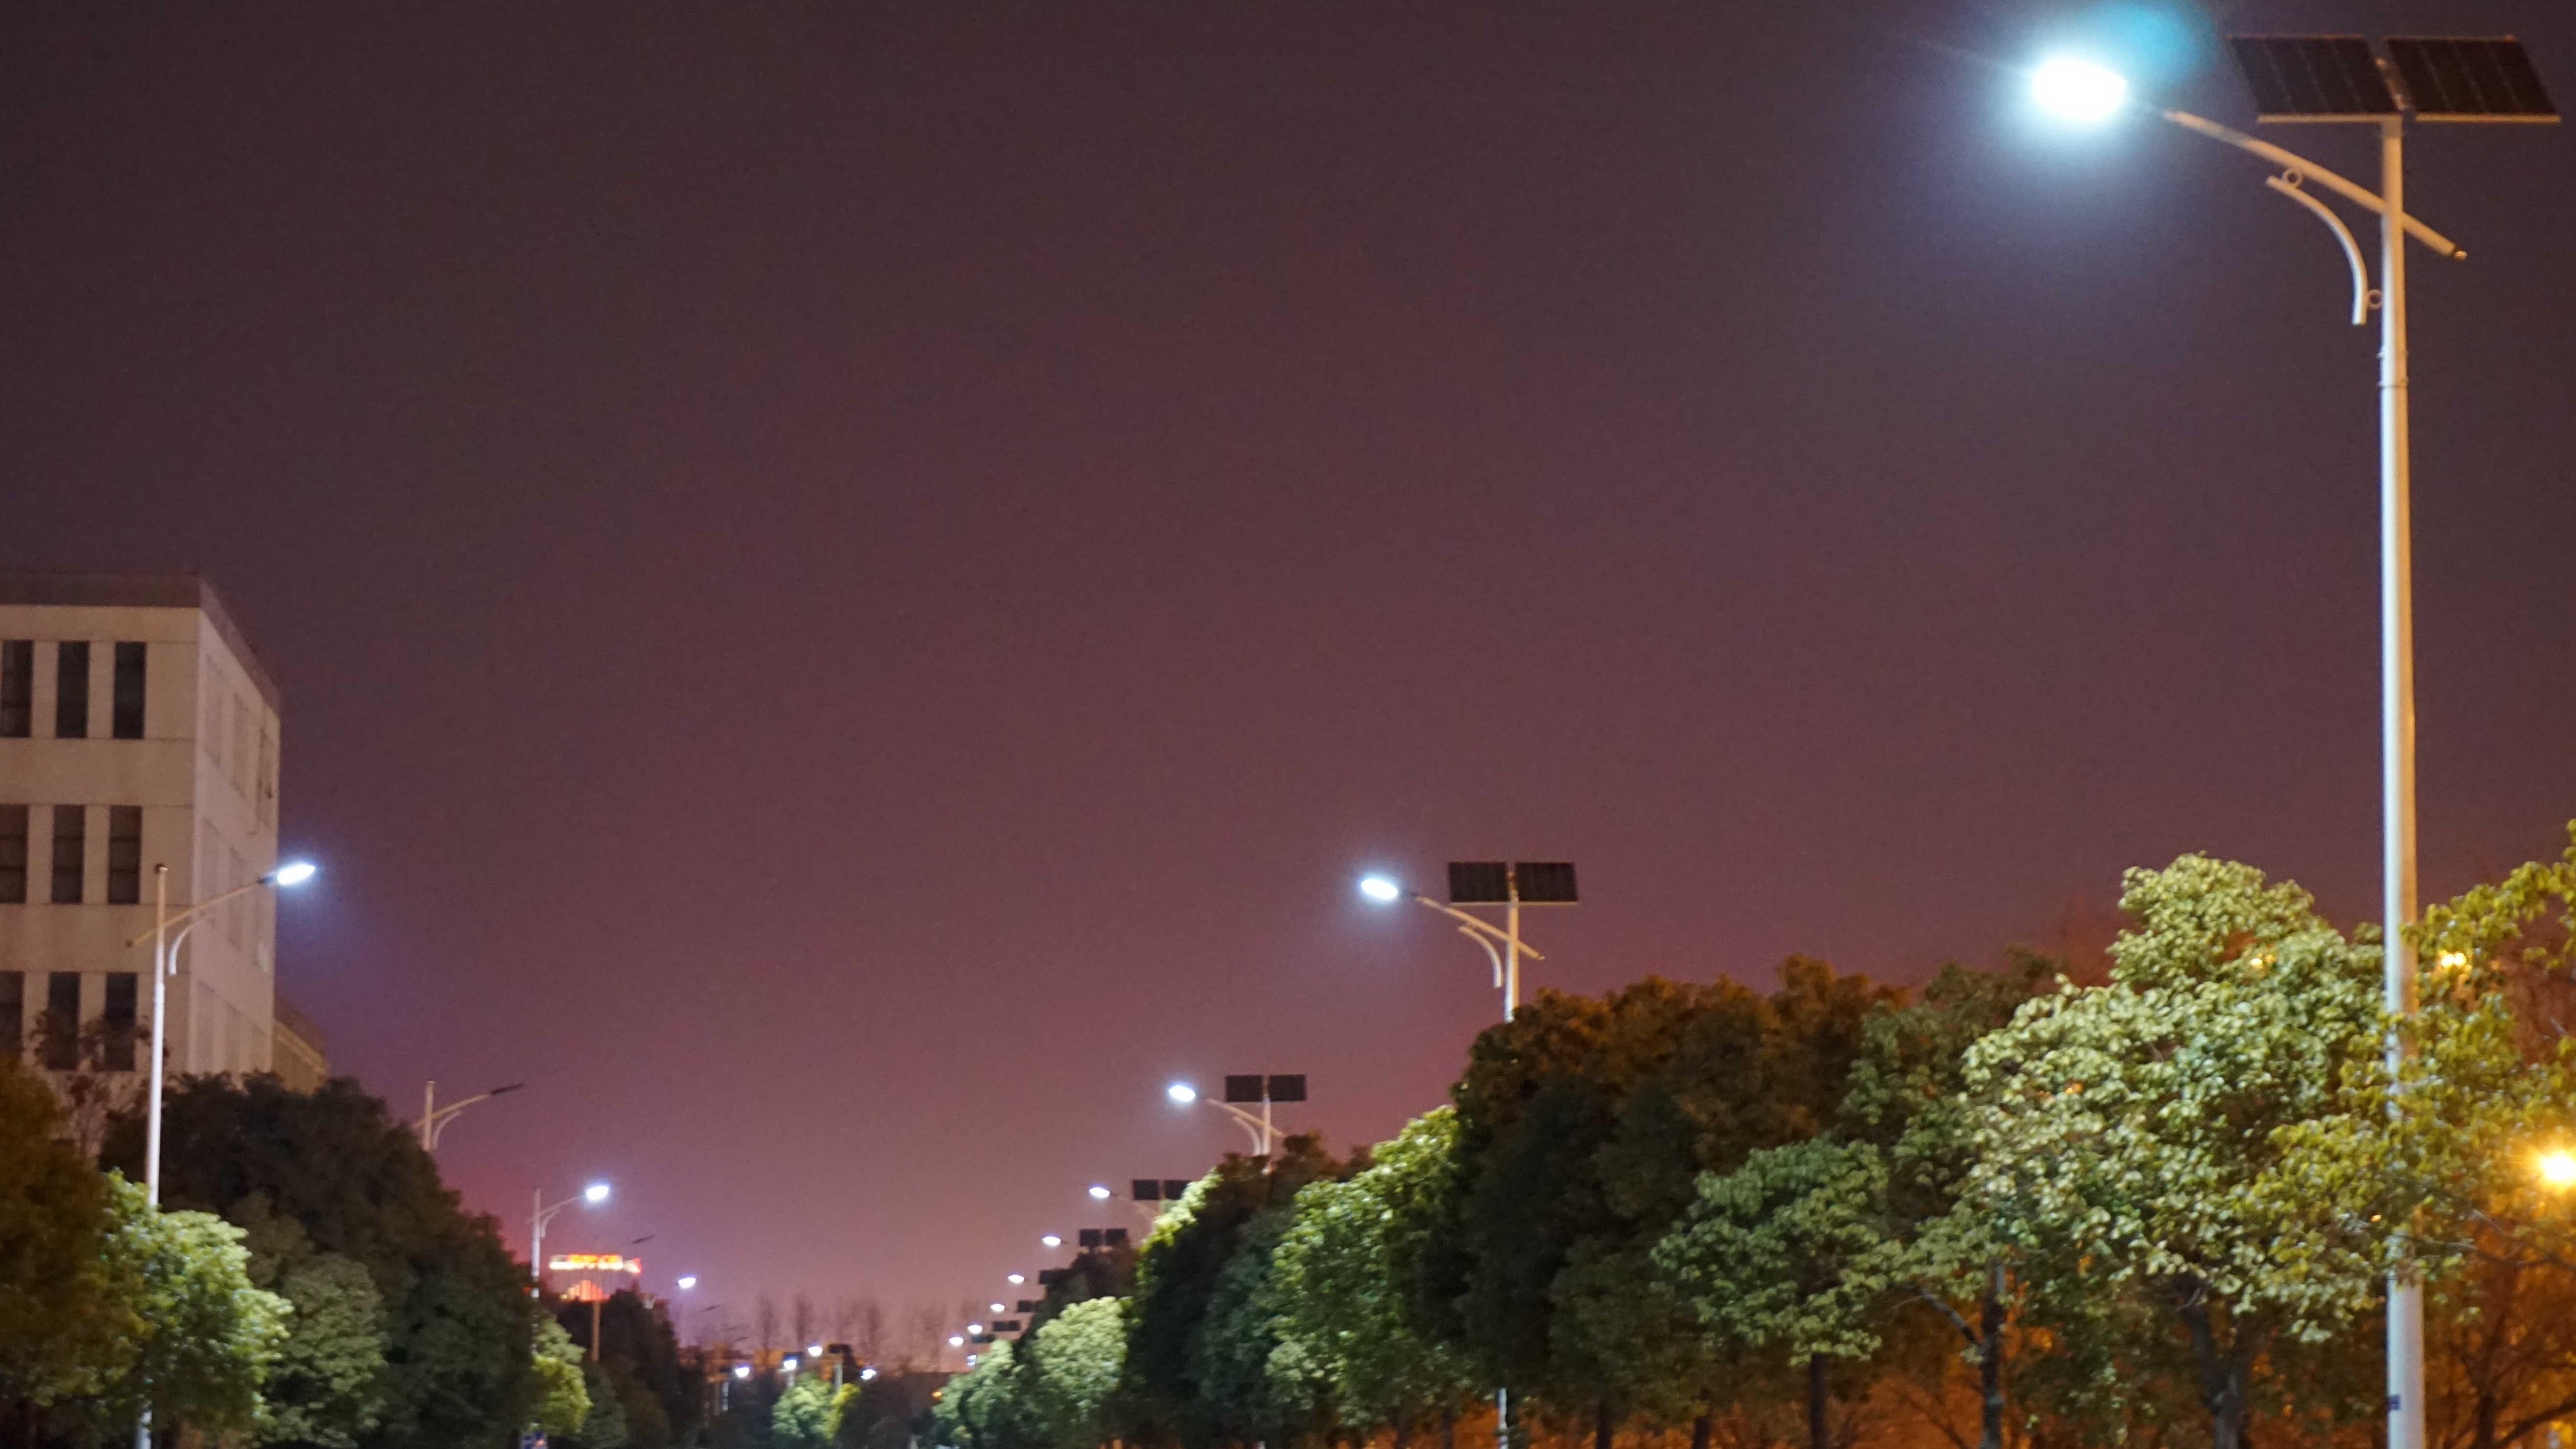 How to Calculate the Optimal Height & Spacing Layout for LED Solar Street Light? hishine